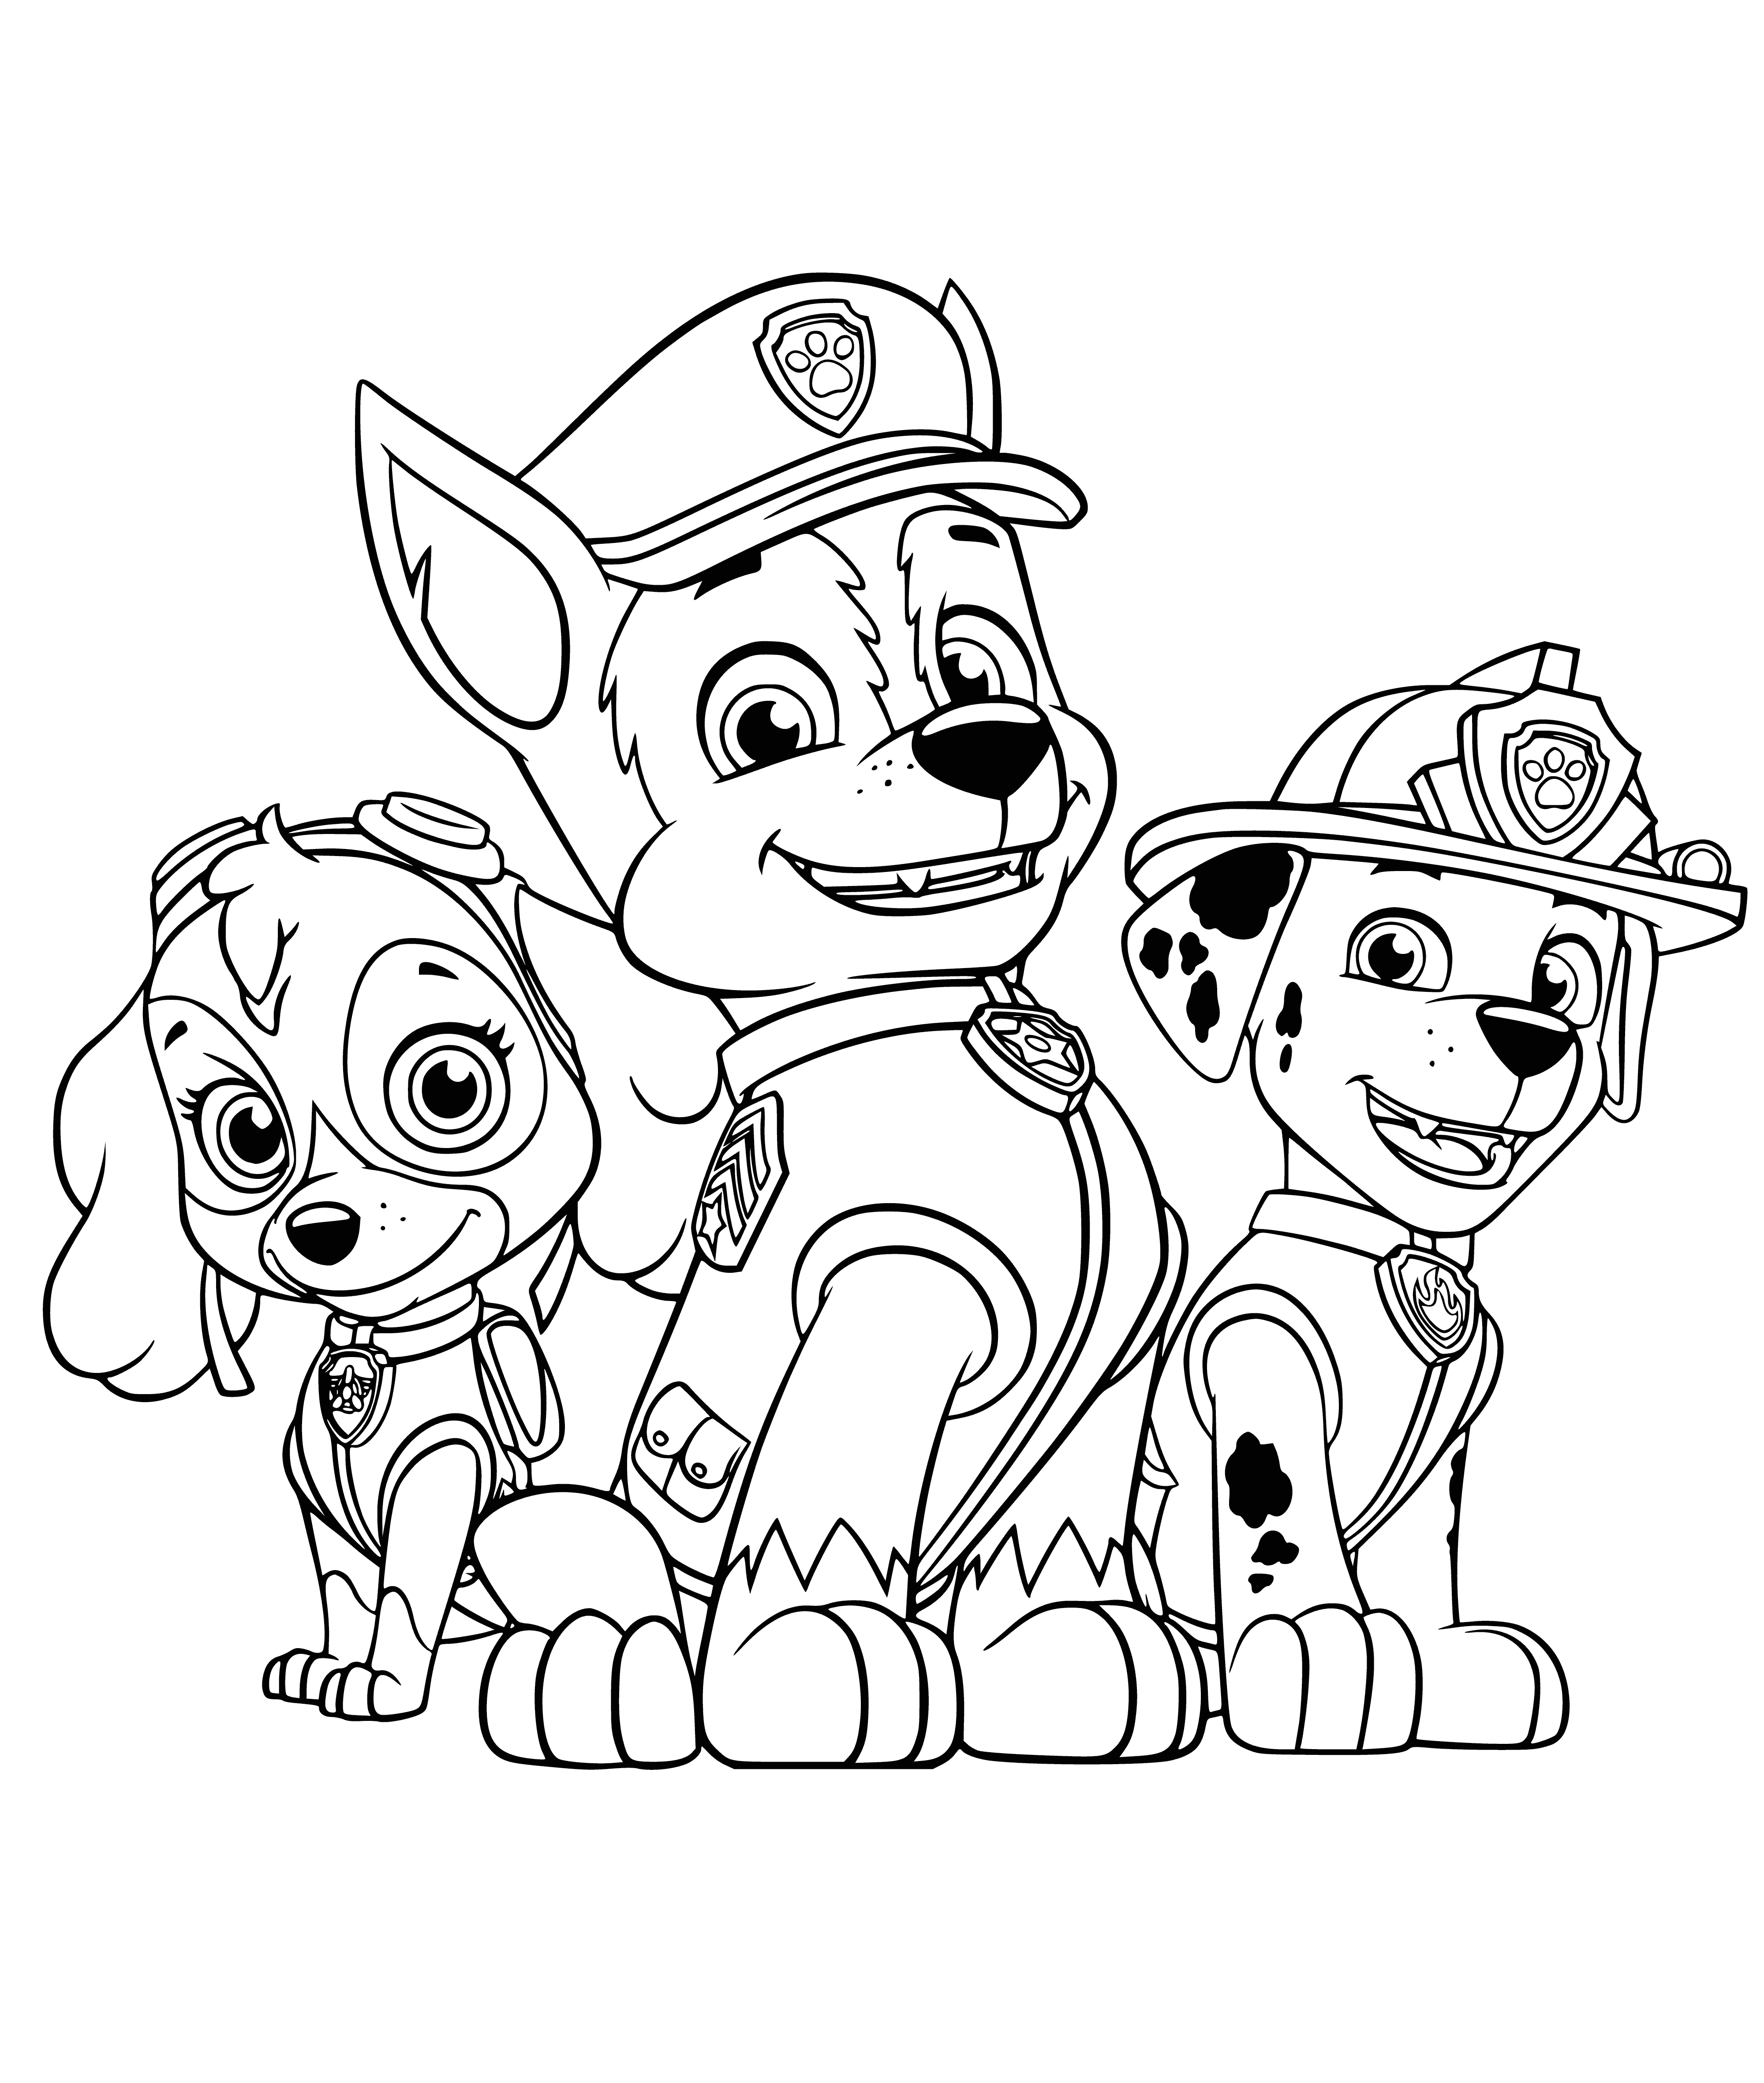 Skye, Racer and Marshal coloring page